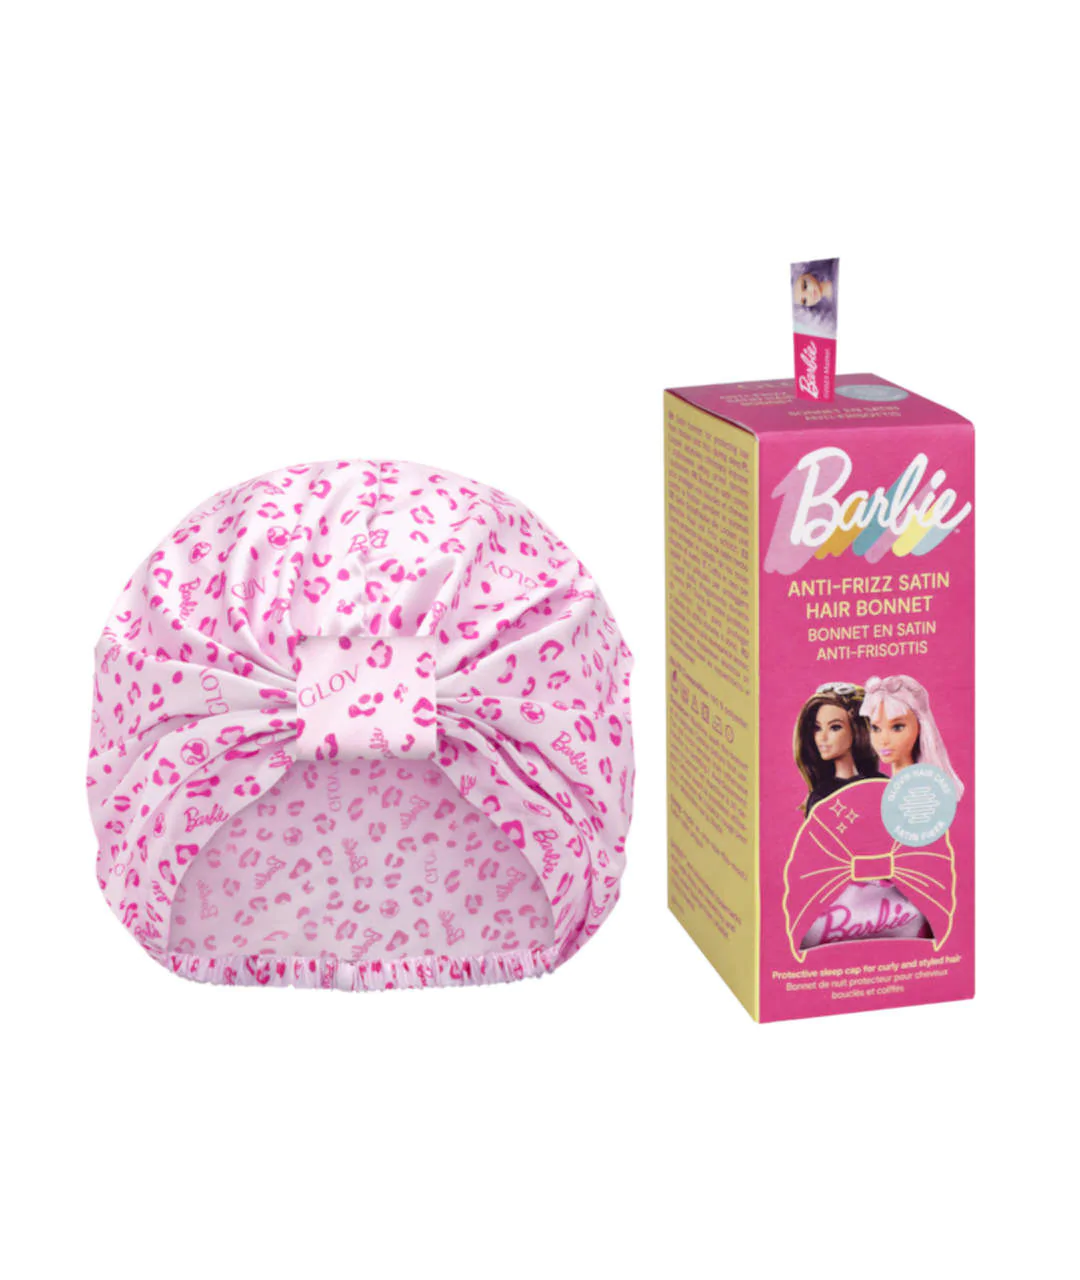 Satin Bonnet - Satin cap to protect curly and styled hair, Barbie™.